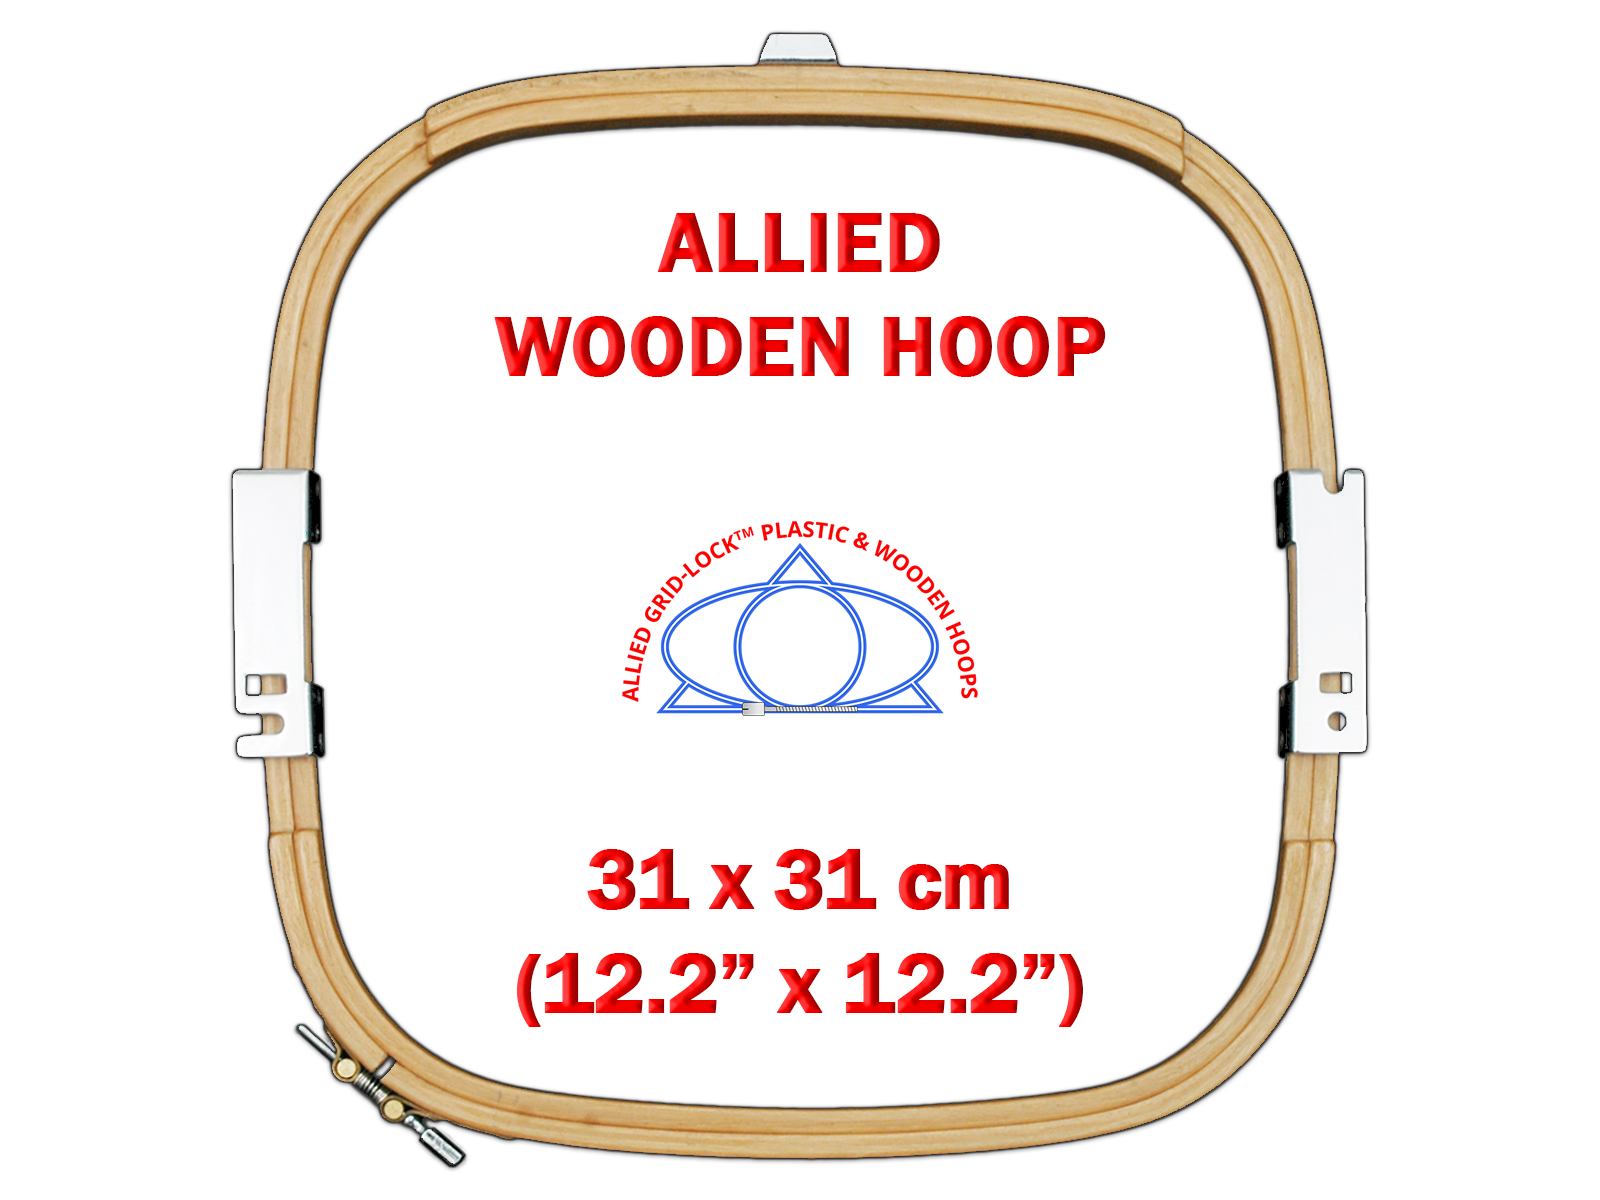 Allied Wooden Hoop for Avance 12.2" x 12.2" wooden Questions & Answers